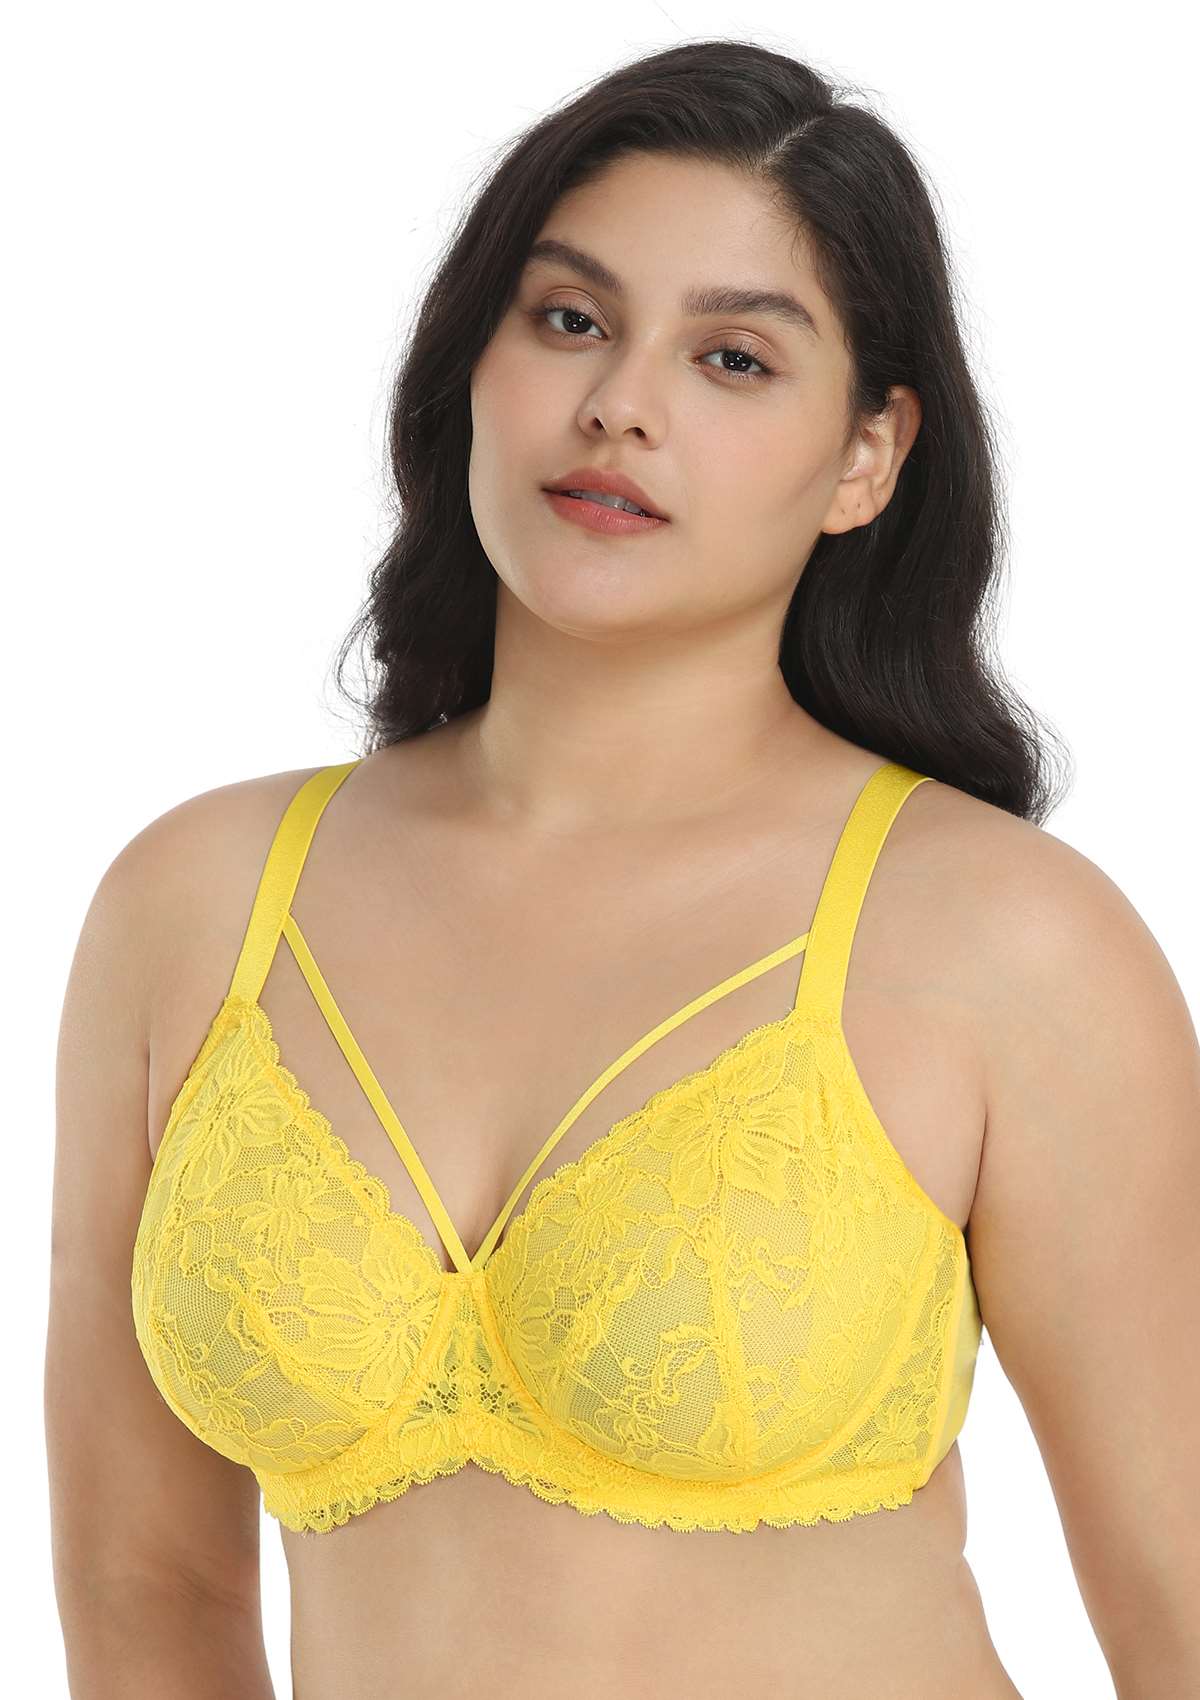 HSIA Unlined Lace Mesh Minimizer Bra For Large Breasts, Full Coverage - Bright Yellow / 34 / C